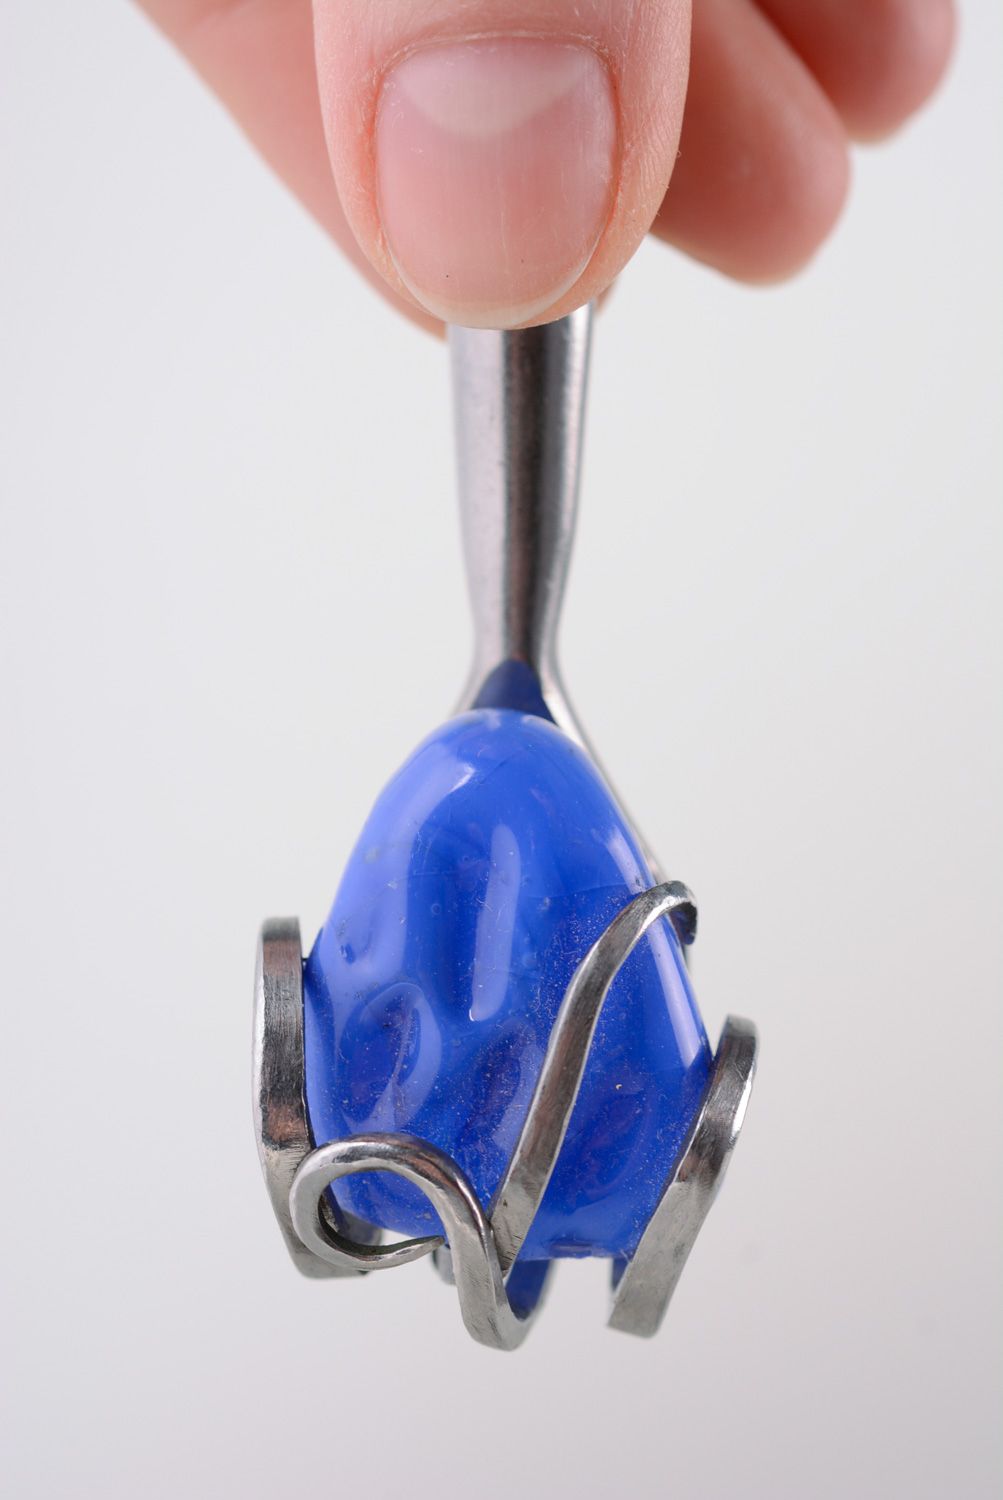 Homemade metal pendant made of cupronickel fork with blue artificial stone photo 3